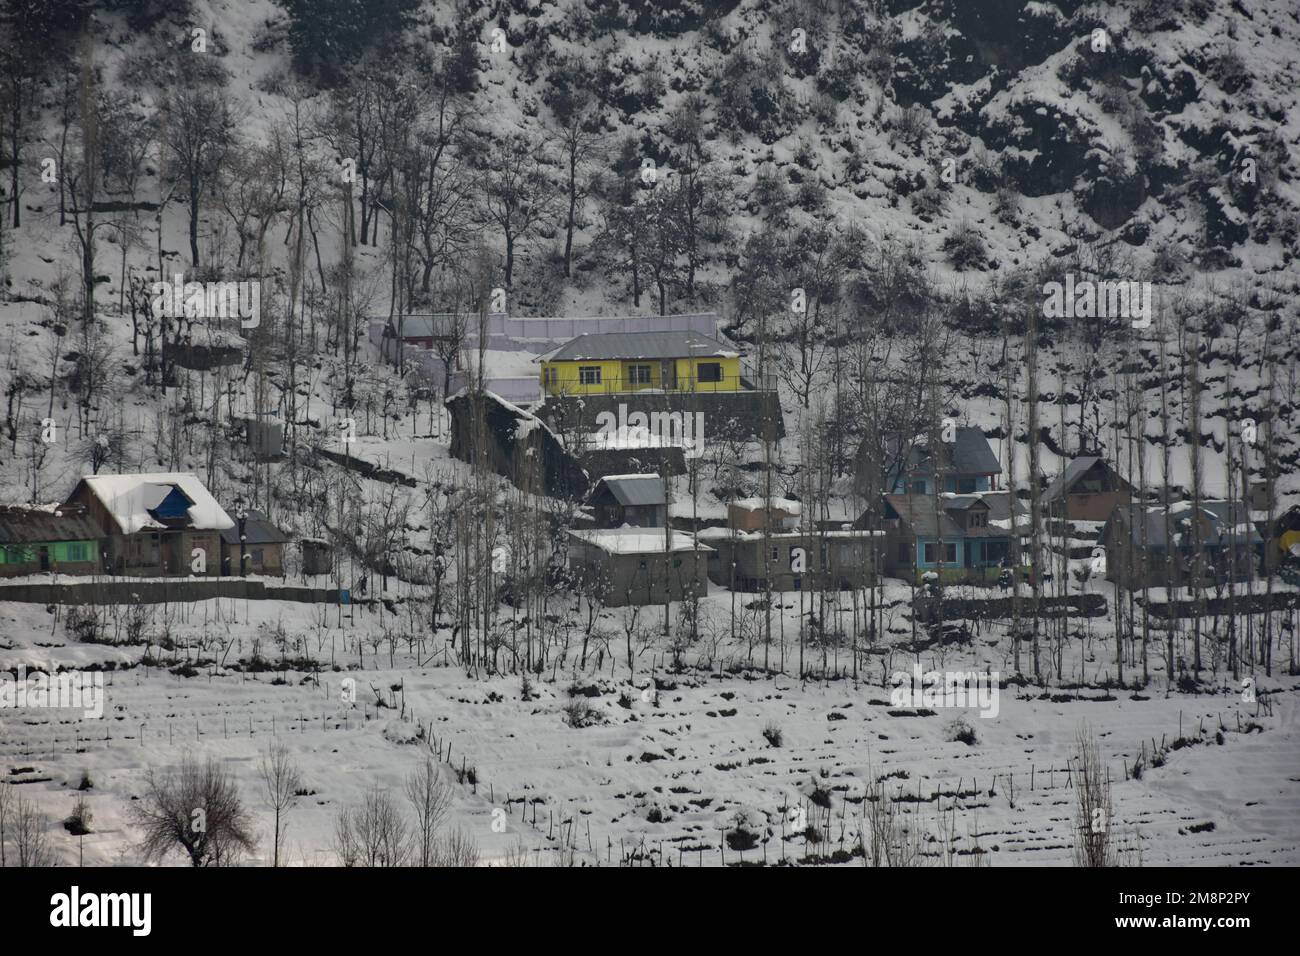 Srinagar, India. 14th Jan, 2023. A general view of snow covered houses and fields after fresh snowfall on the outskirts of Srinagar. Weather improved in Kashmir valley after days of moderate to heavy snowfall and rains. Meanwhile, Avalanches were reported on Saturday in Bandipora district and Sonamarg hill station which have been witnessing moderate to heavy snowfall over past few days. This is the second incident reported in the popular hill station in the last two days. Two labourers died on Thursday when an avalanche hit the work site of a construction company in Sonamarg. Credit: SOPA Imag Stock Photo